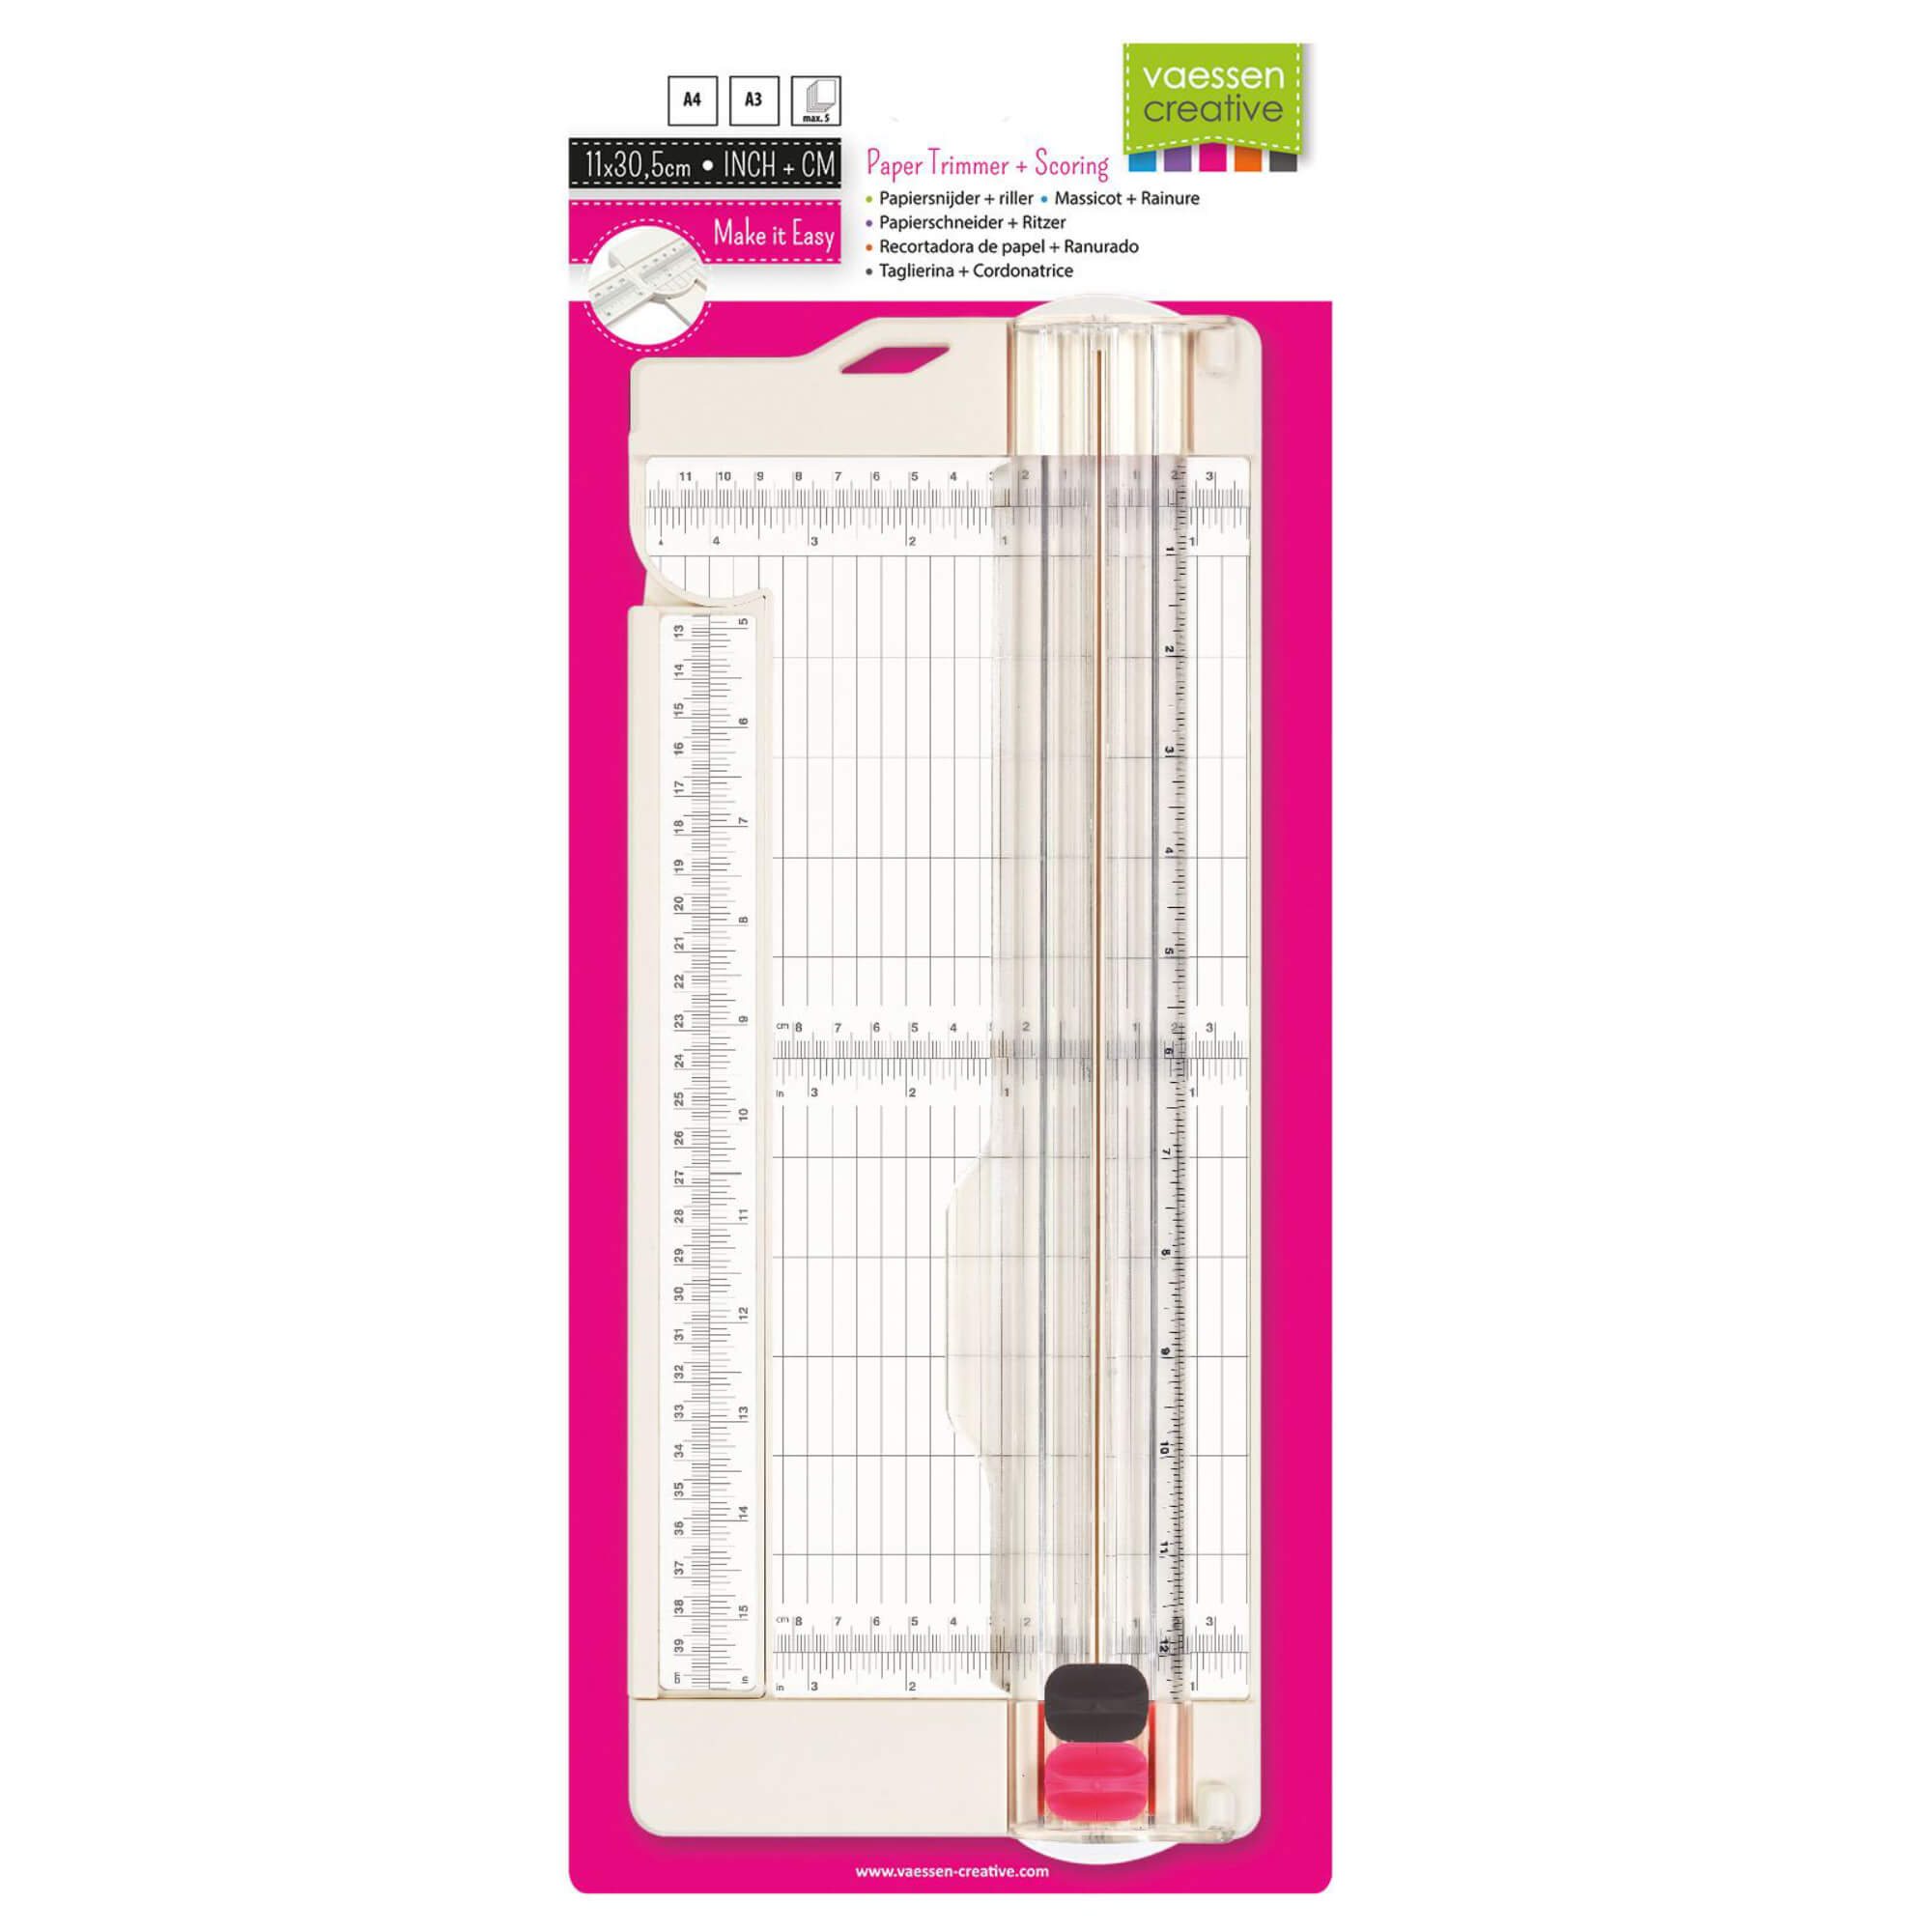 Vaessen Creative Easy Inches Scoring Board for Card Making and Paper Crafts  With for sale online